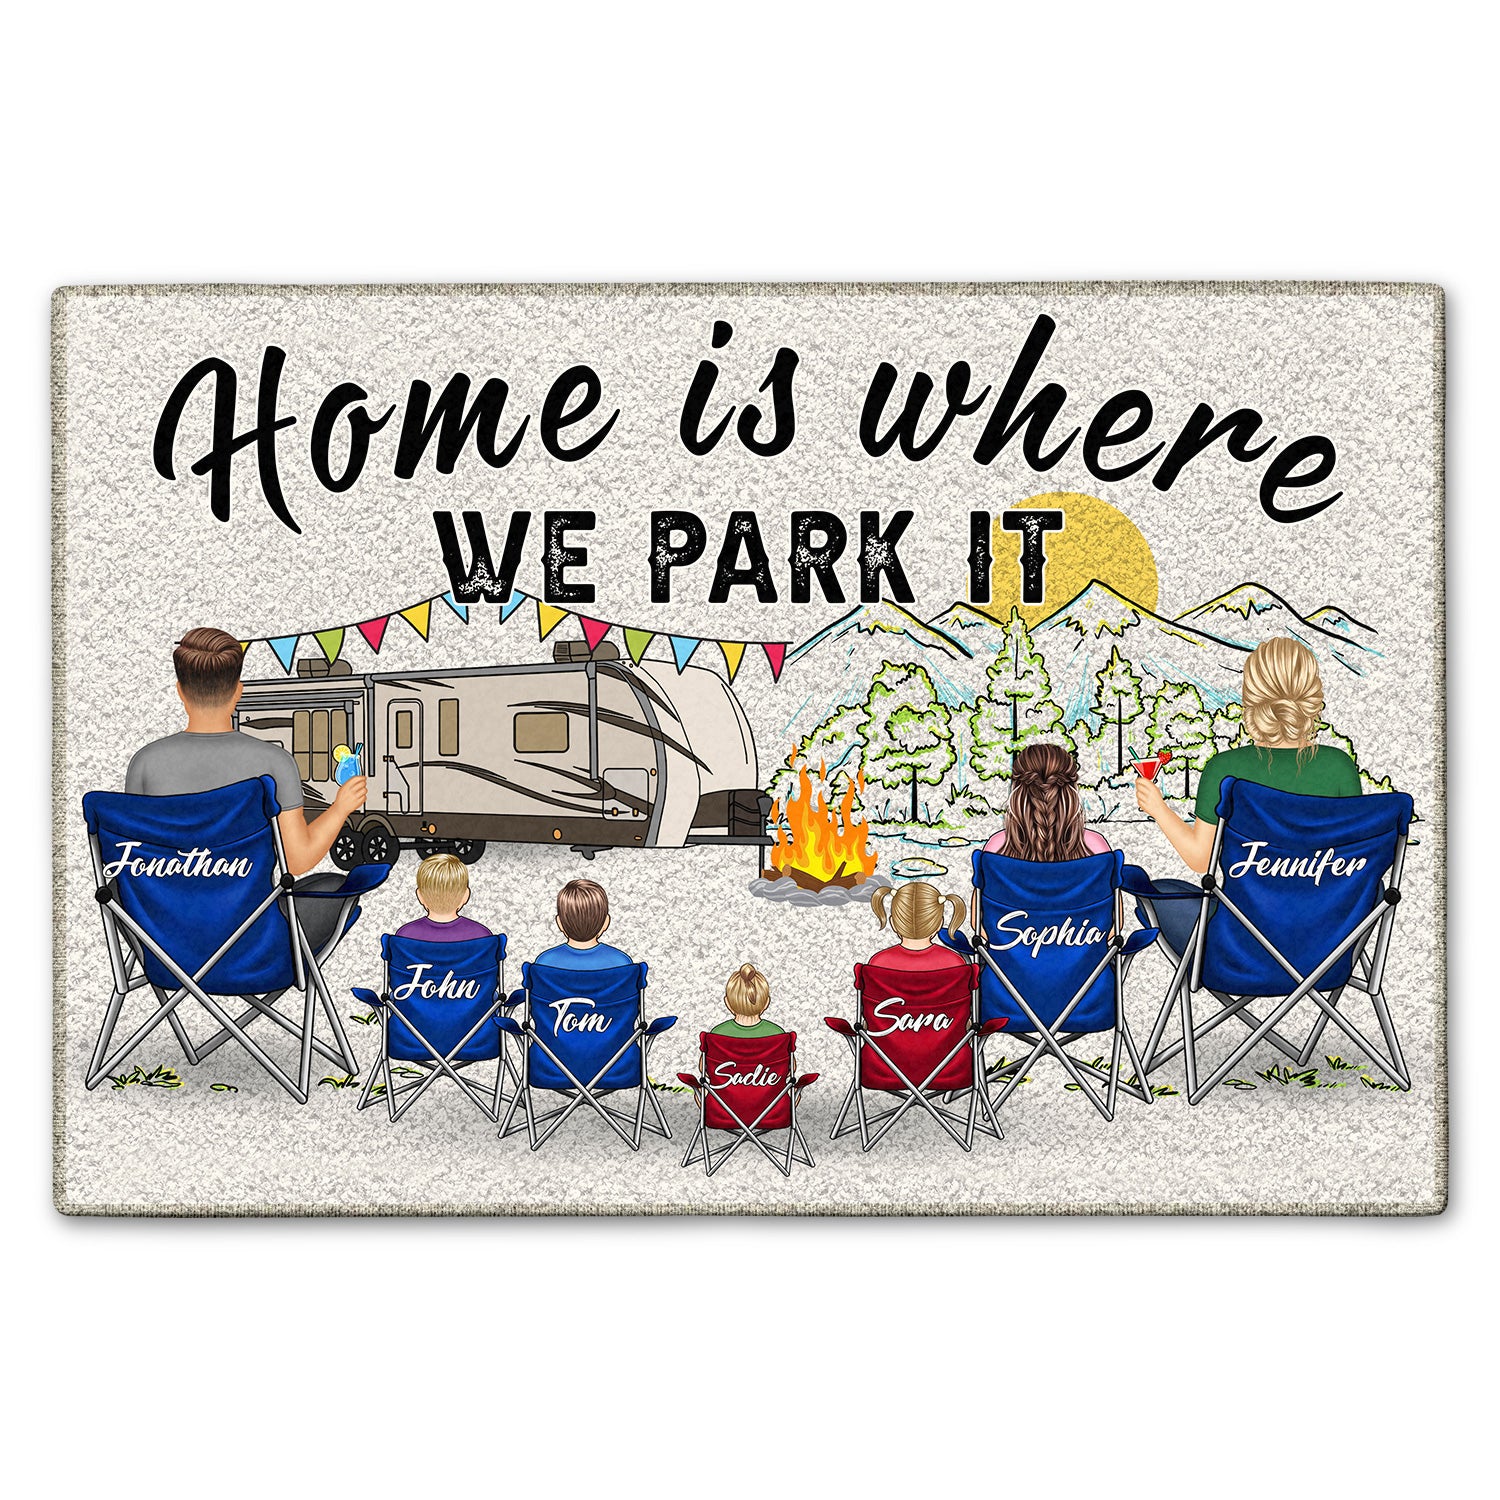 Making Memories One Campsite At A Time - Camping Family Gift - Personalized Doormat